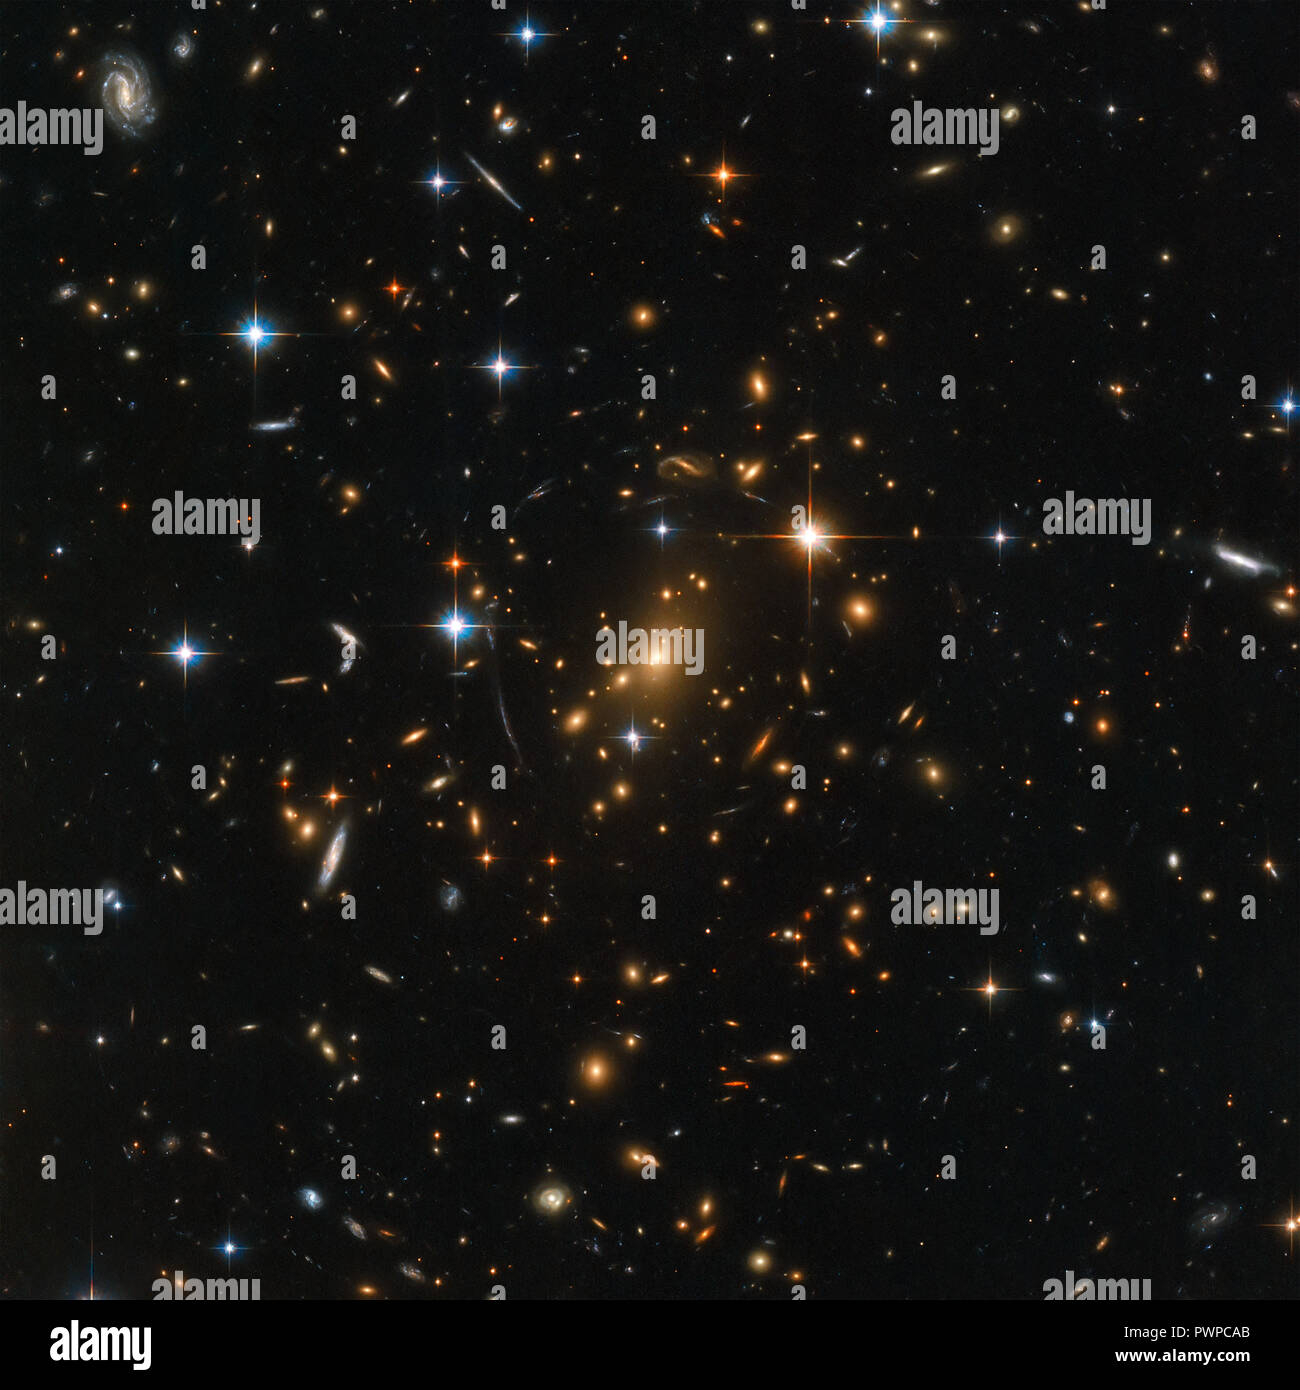 Early Universe Hubble Image Cluster Of Galaxies Dark Matter Dark